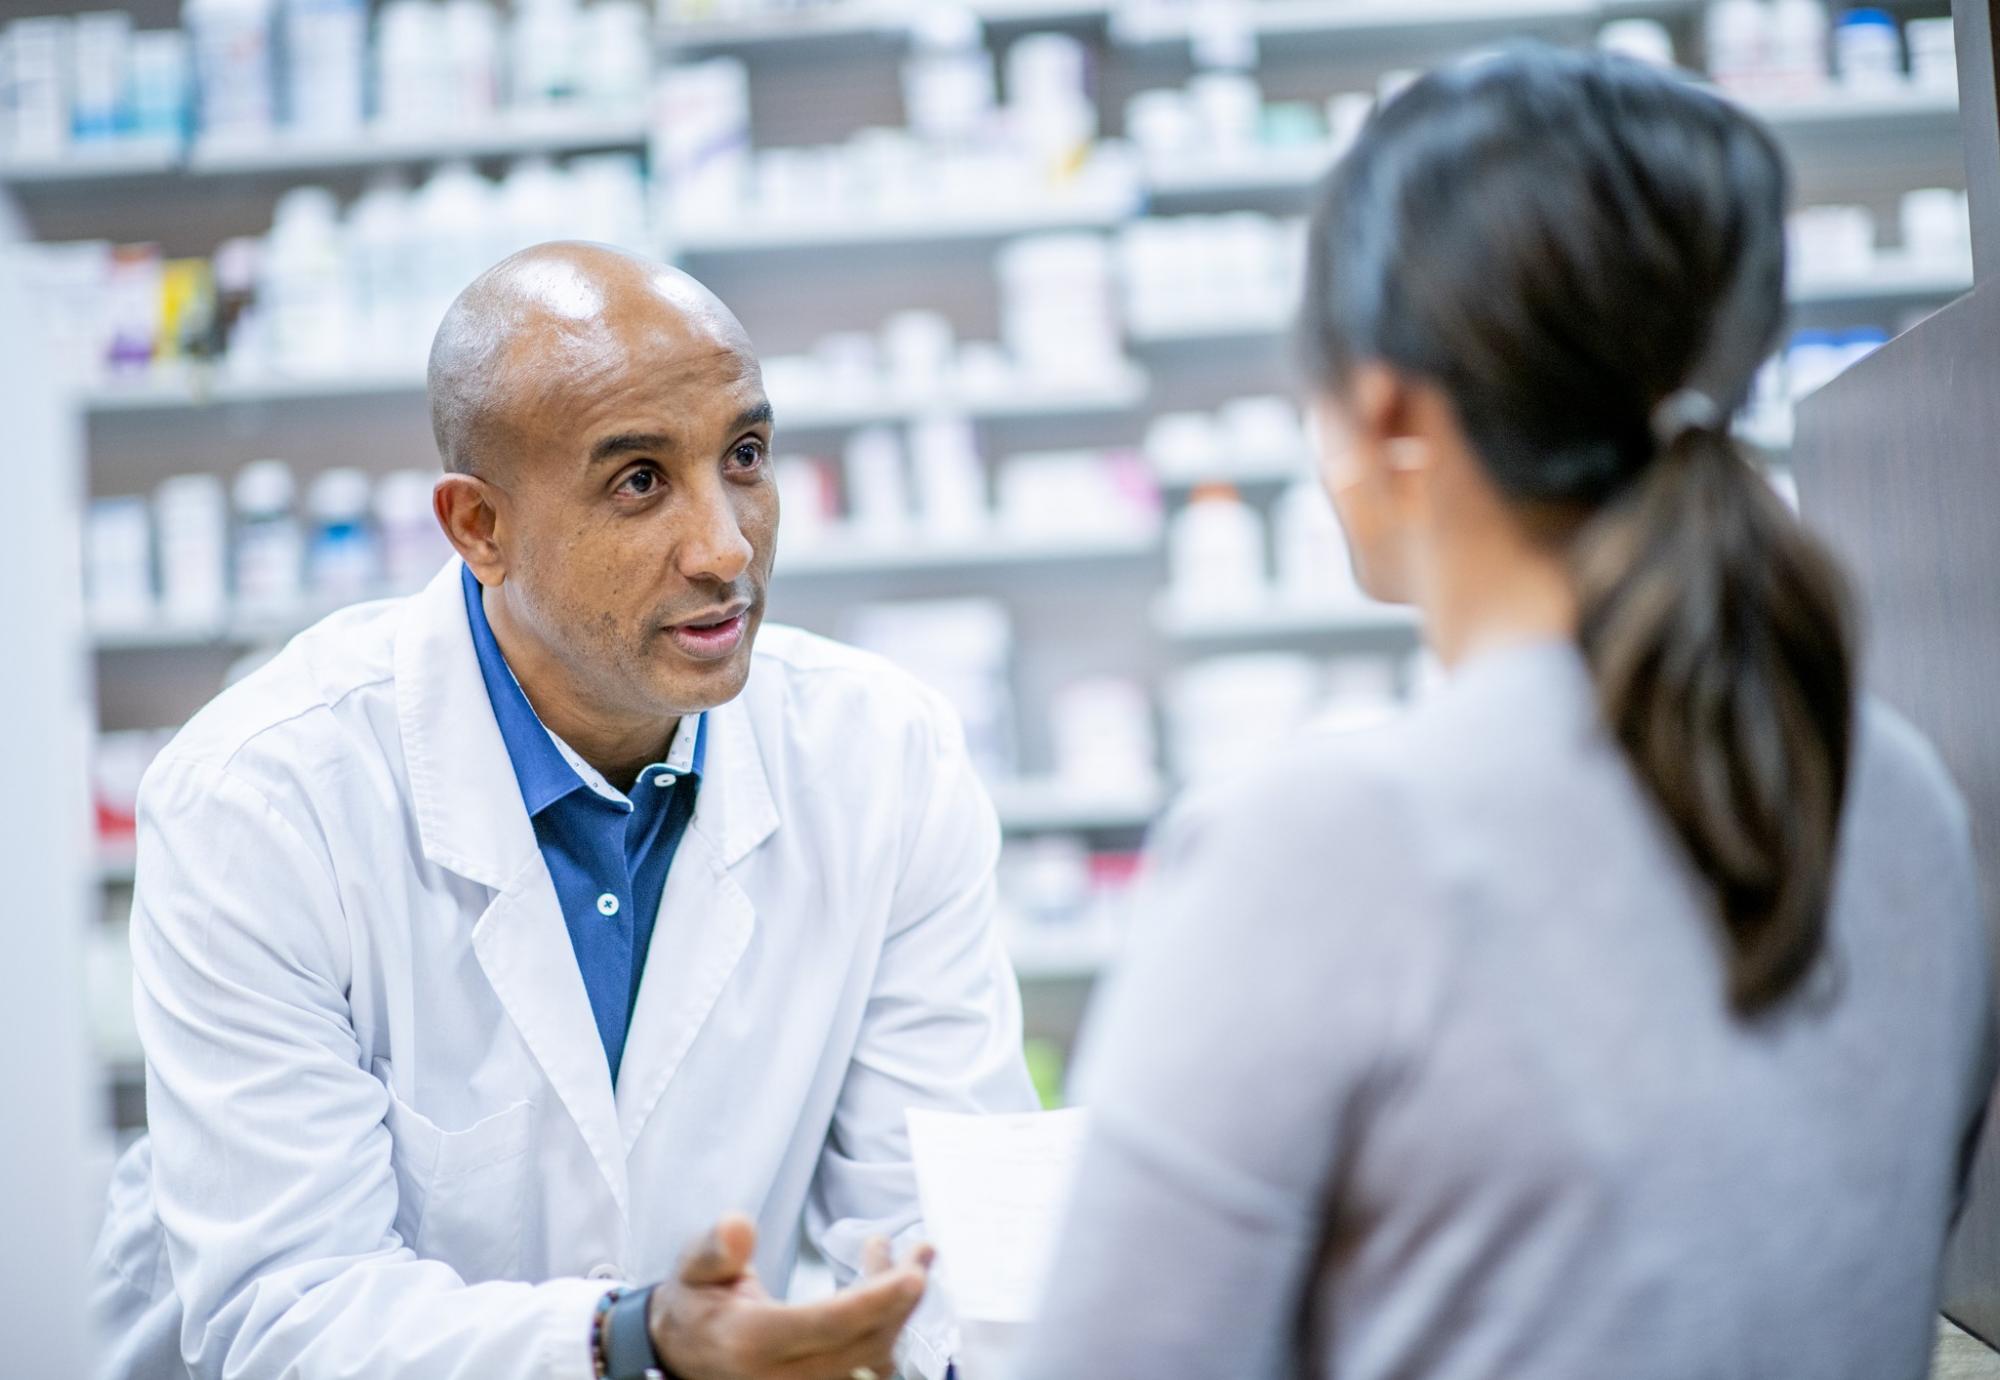 Community pharmacist in discussion with a patient